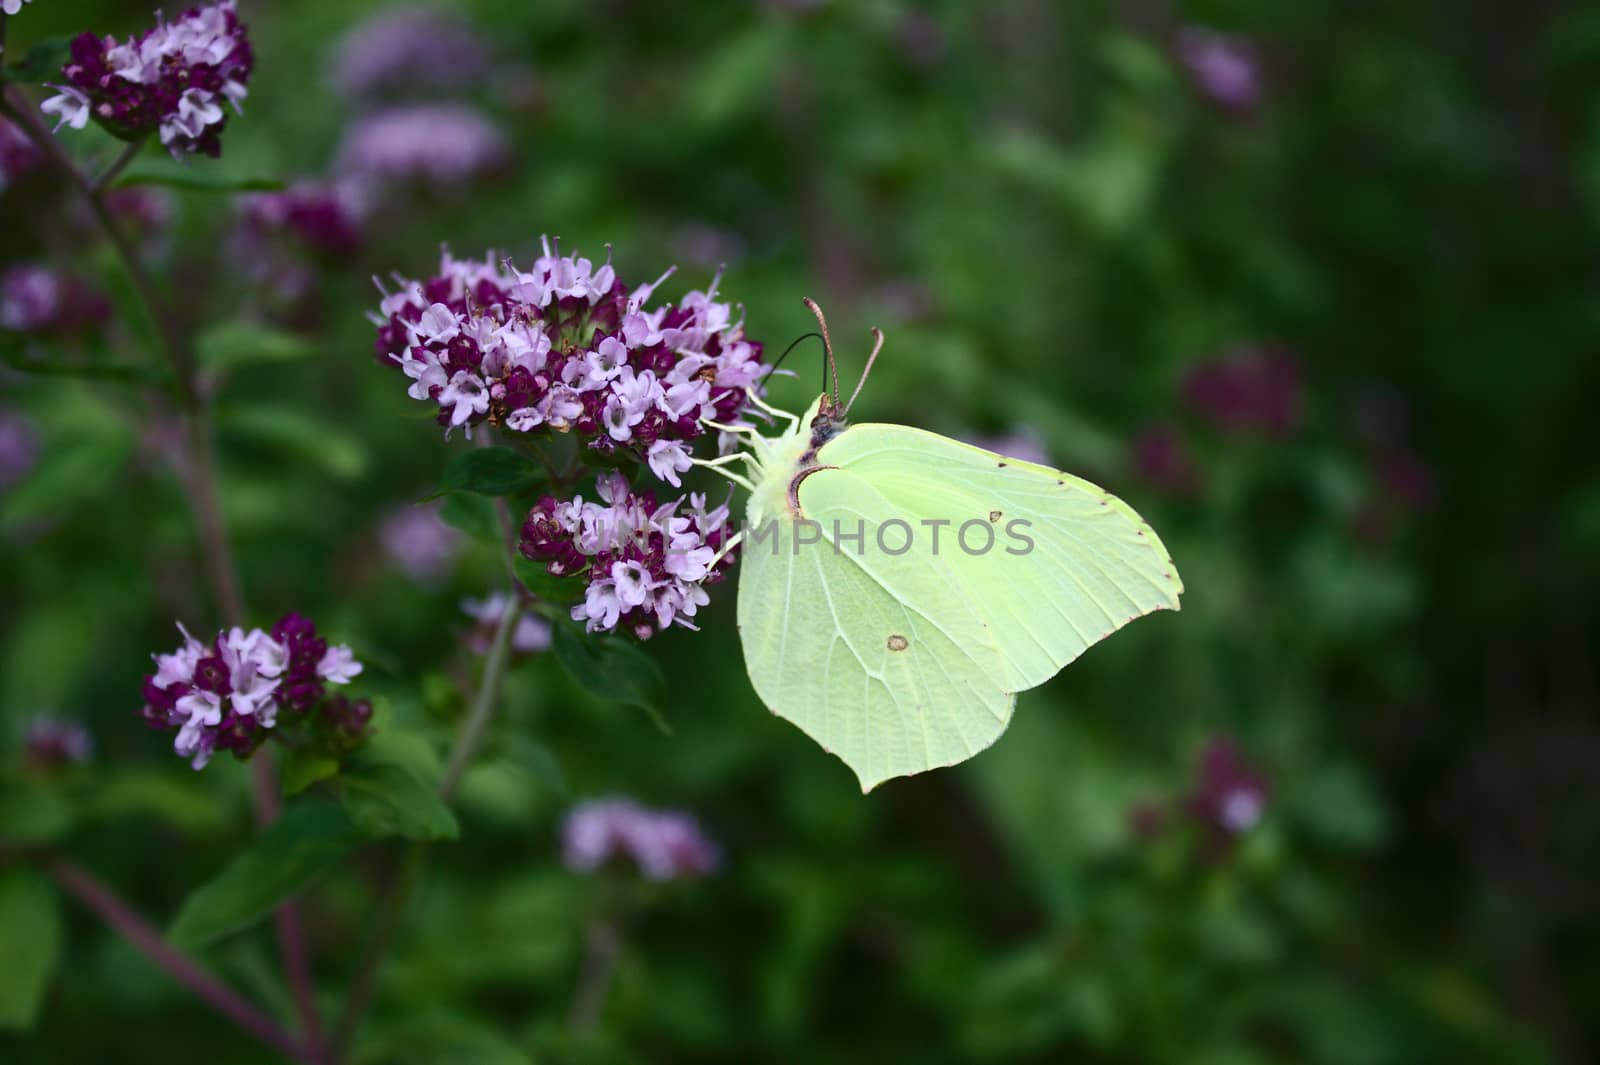 brimstone butterfly on a mint in the forest by martina_unbehauen